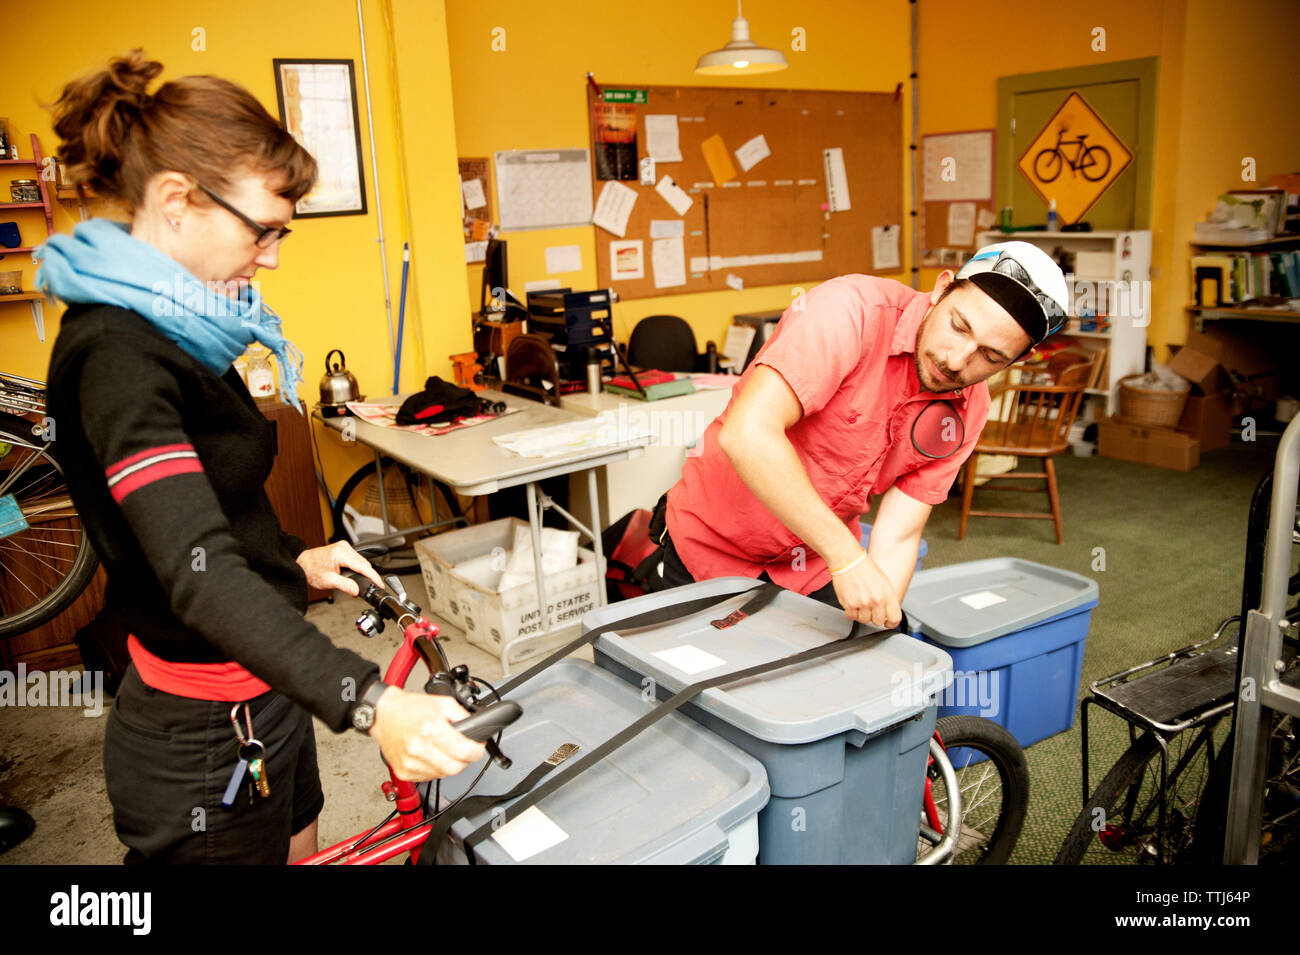 Man and woman tying containers on bicycle at workshop Stock Photo